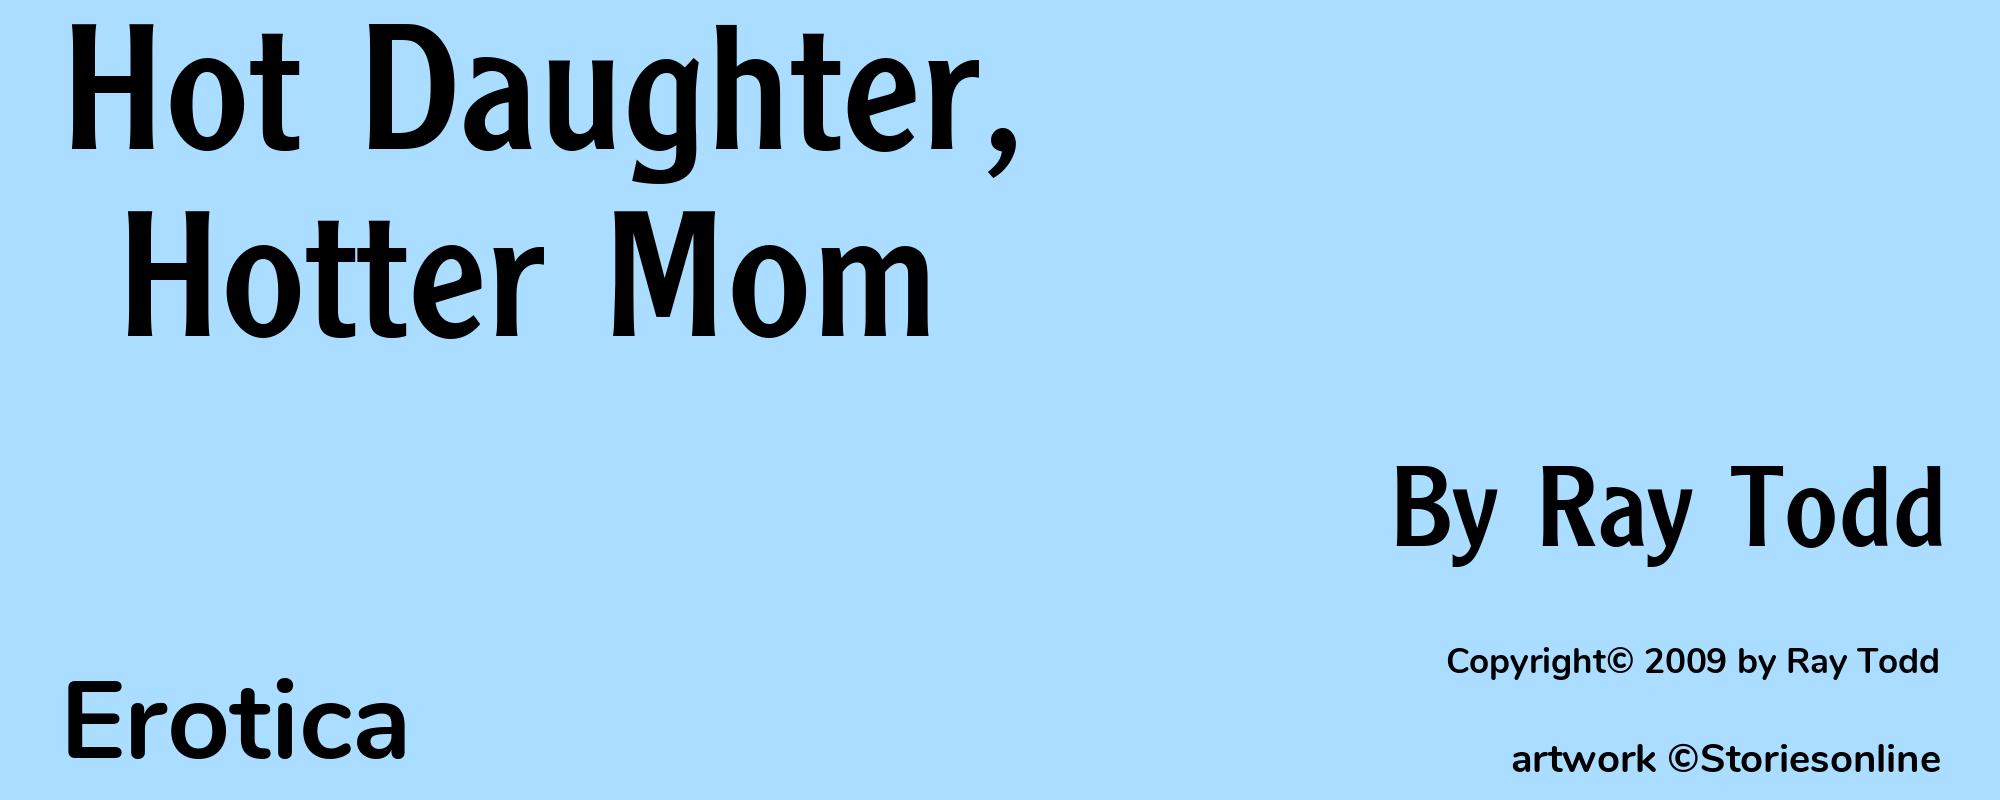 Hot Daughter, Hotter Mom - Cover